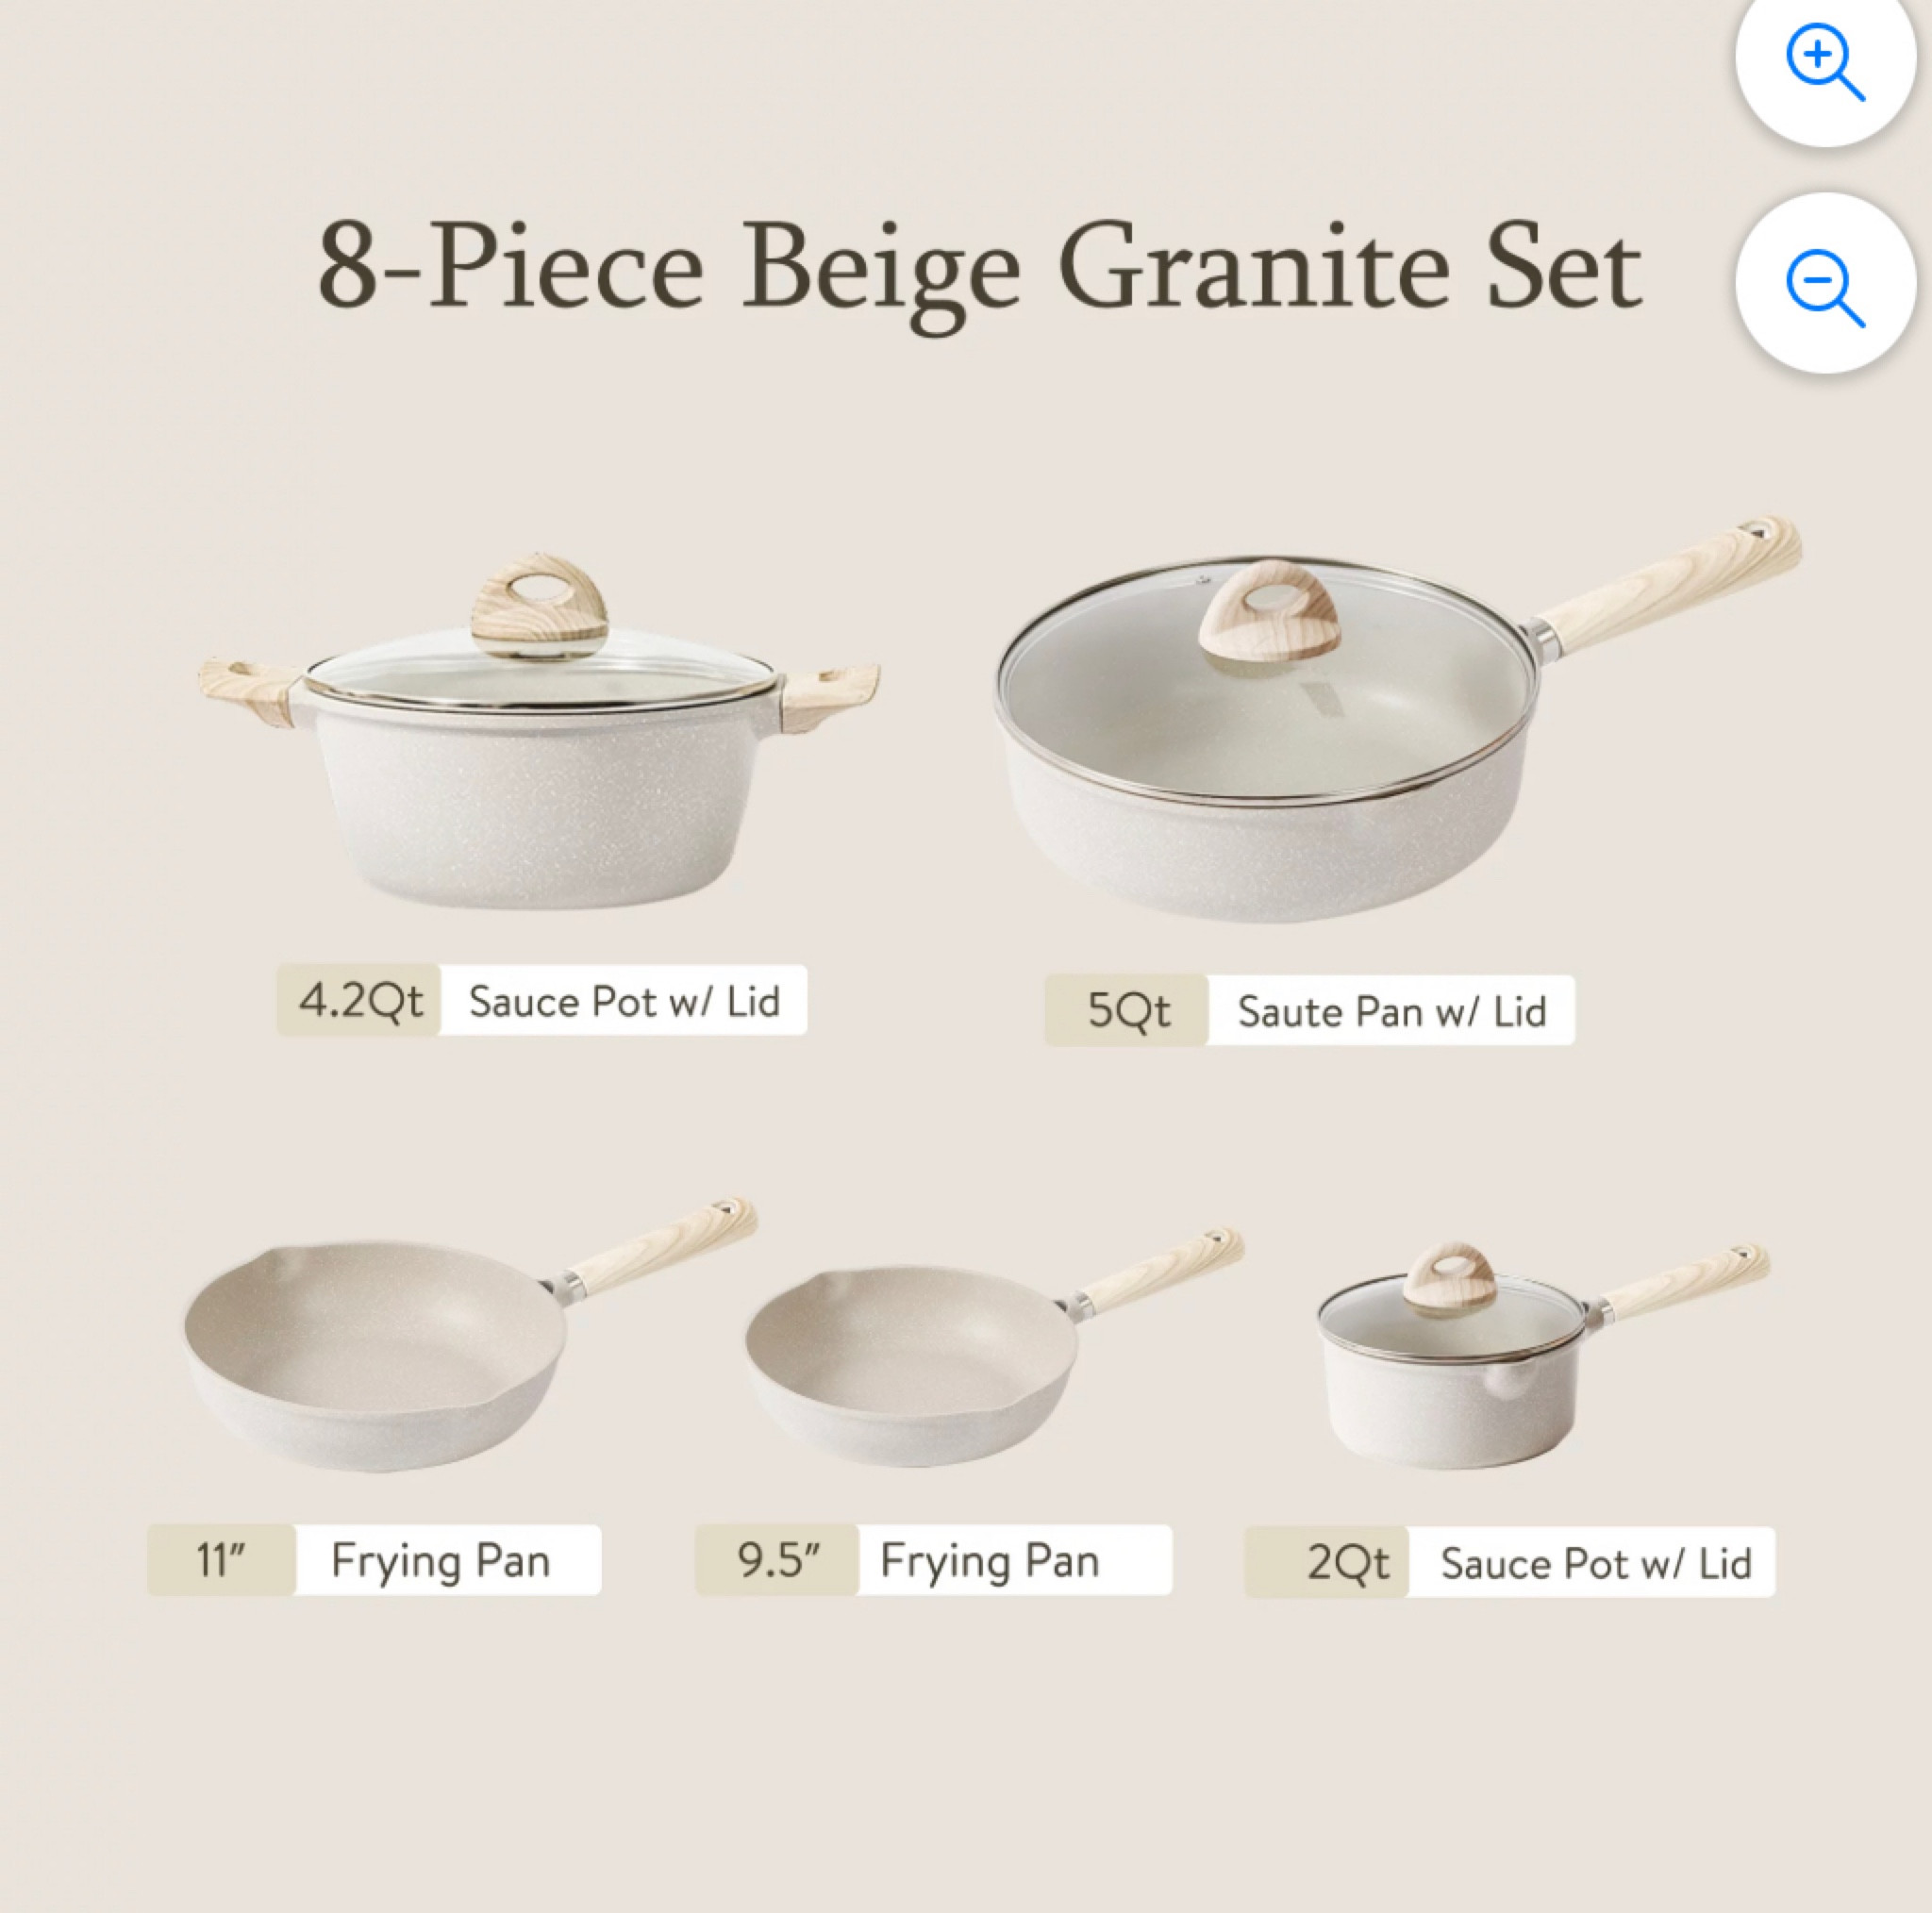 CAROTE Pots and Pans Set Nonstick, by Lulu